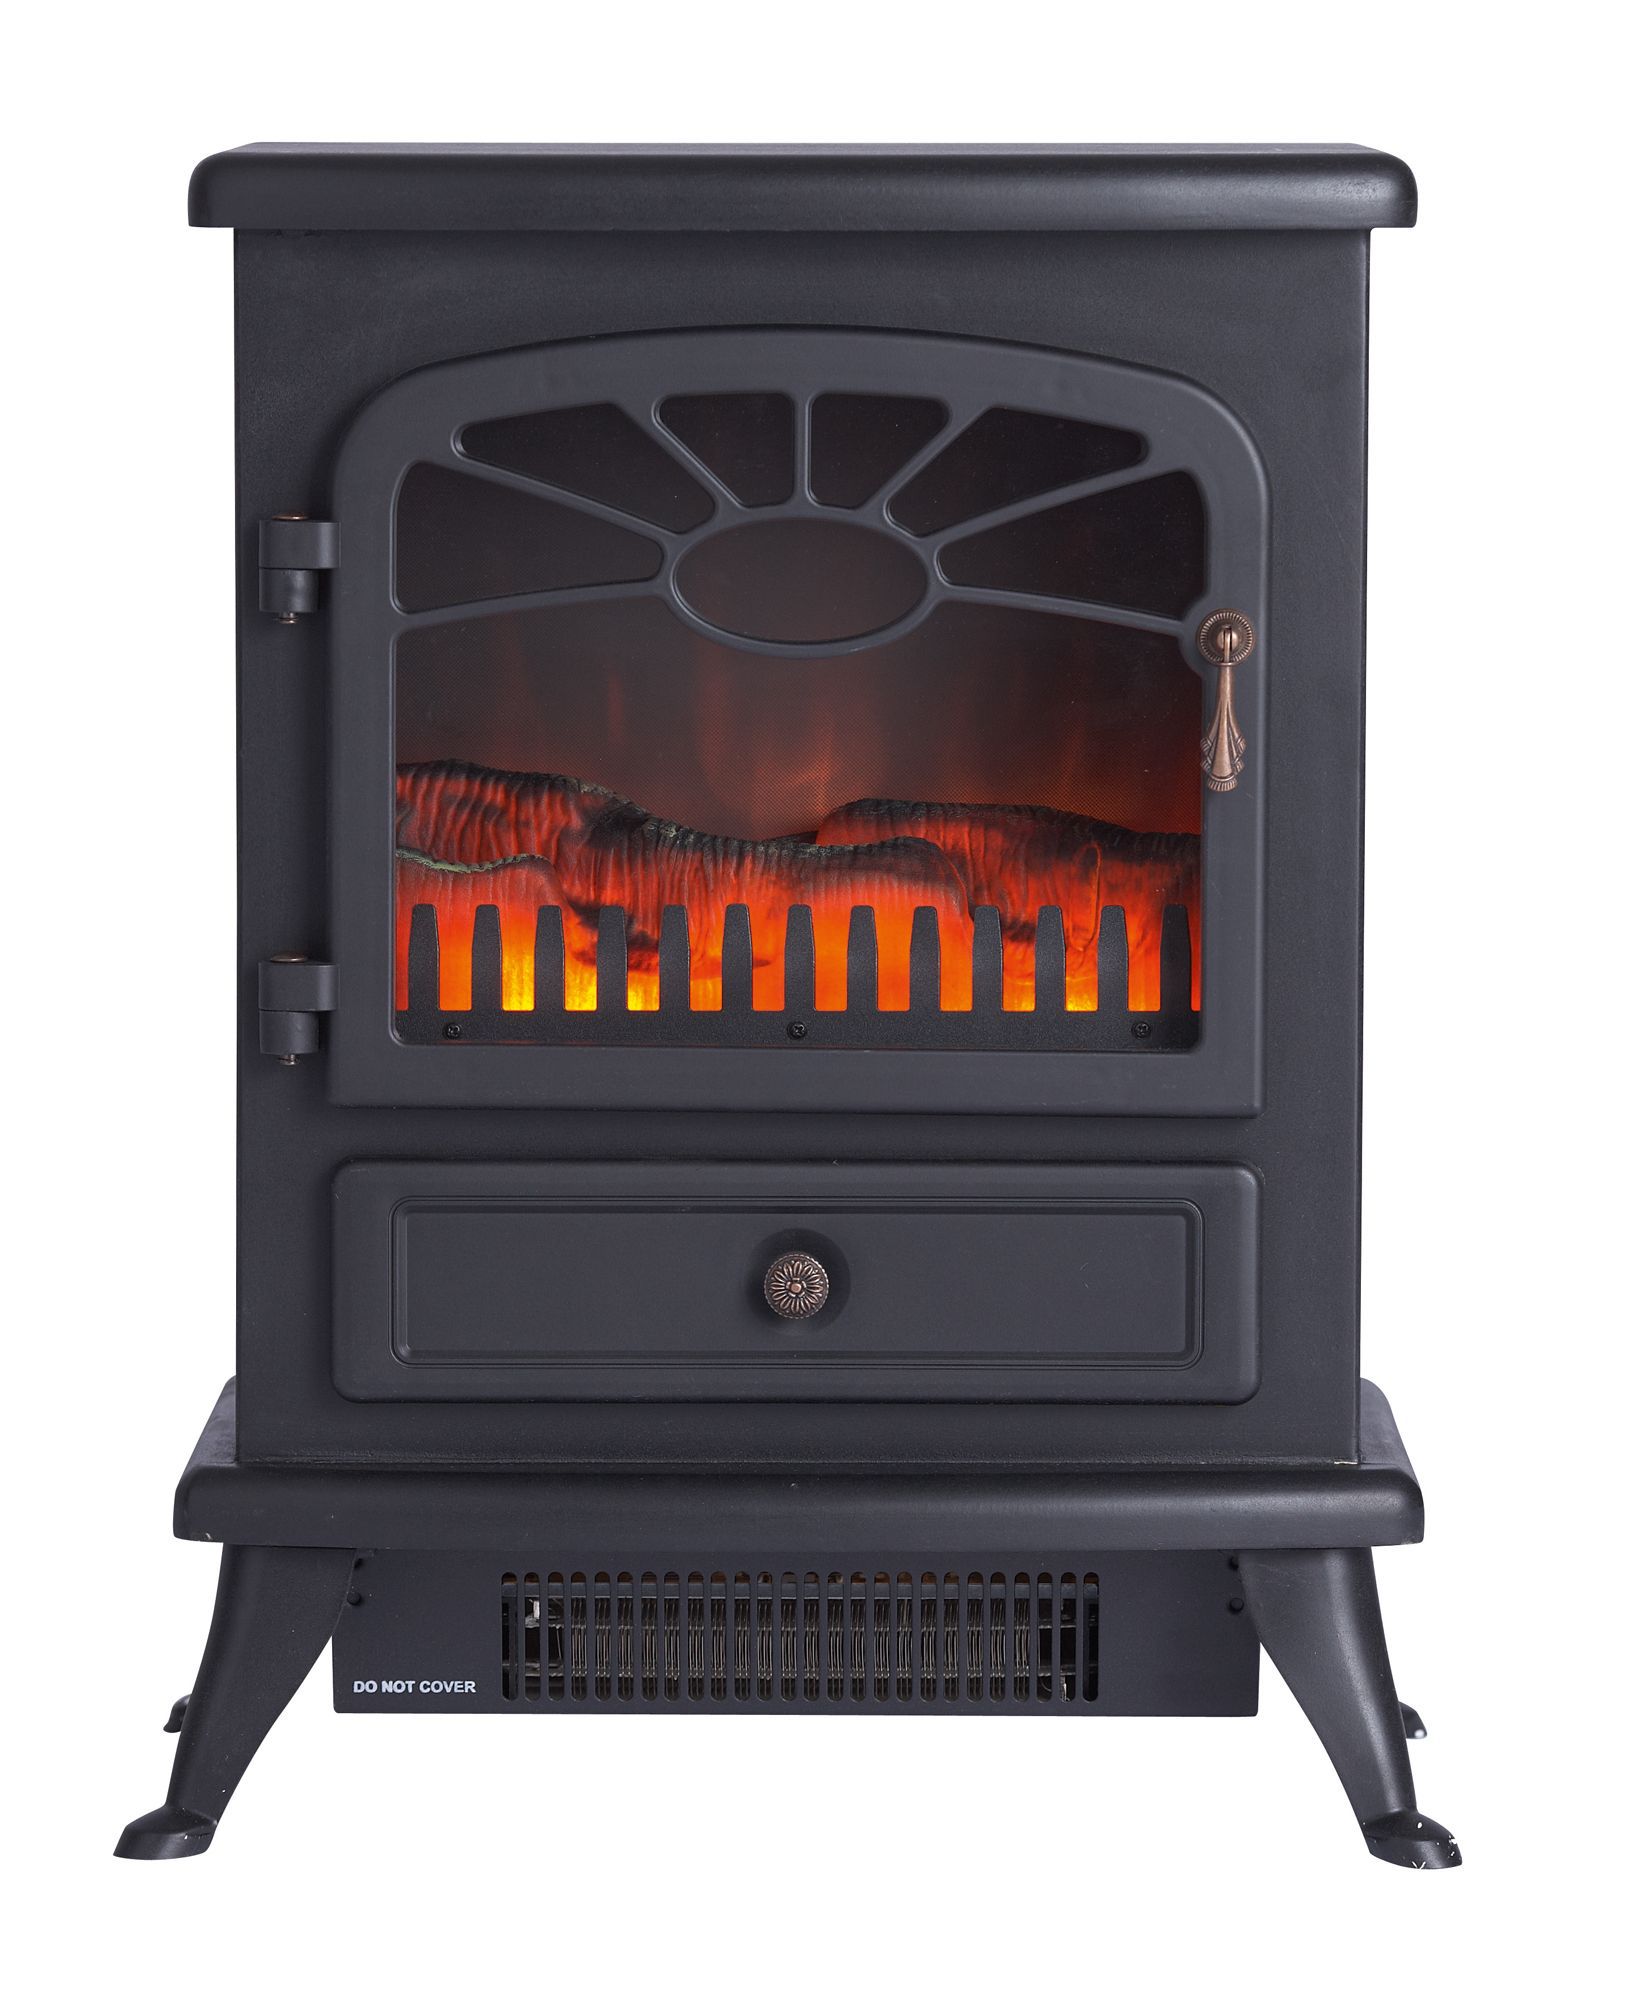 Is an electric stove safe to use at home?